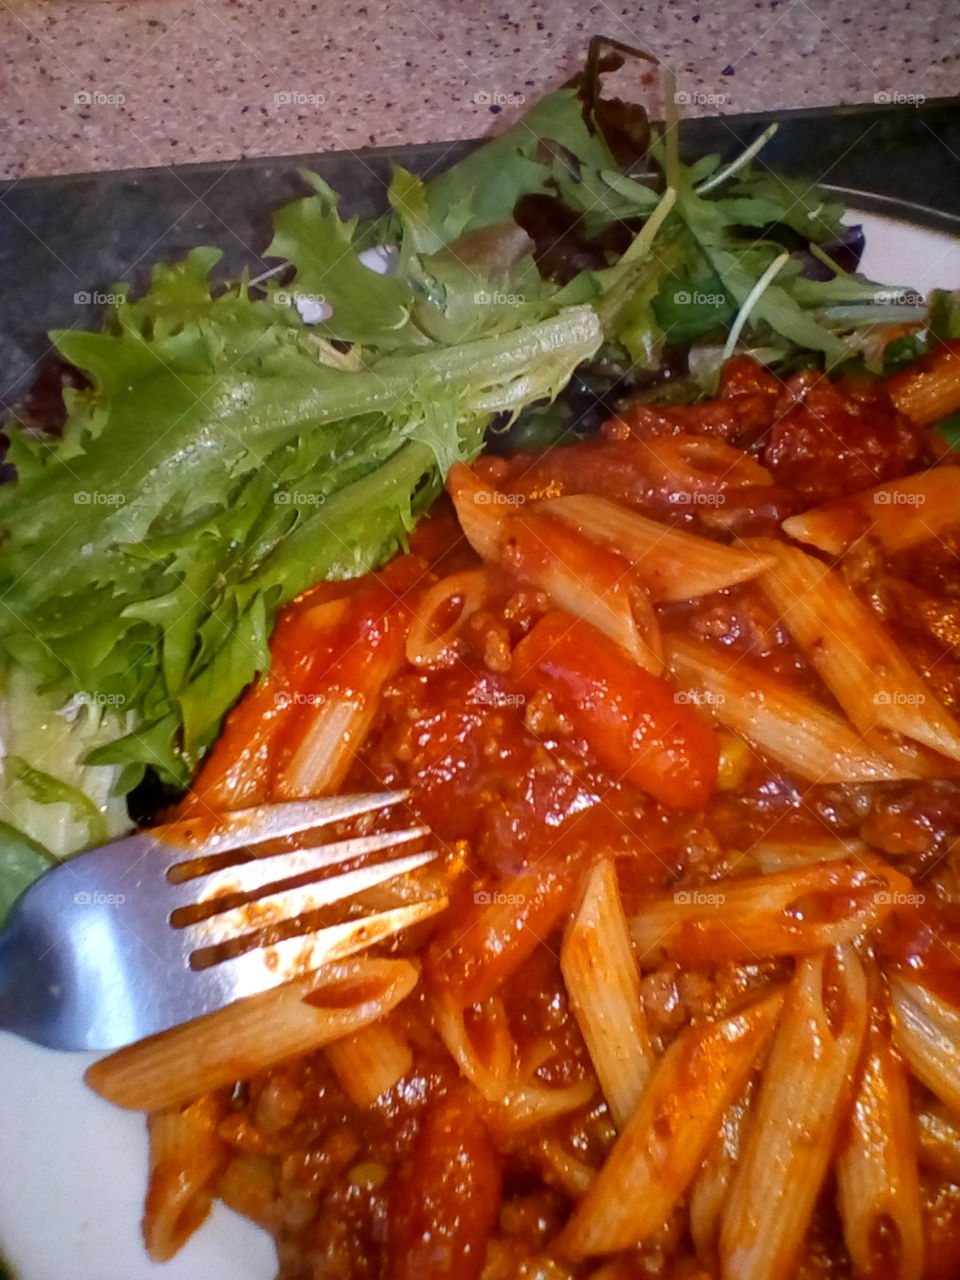 Spaghetti Bolognese with side salad leaves